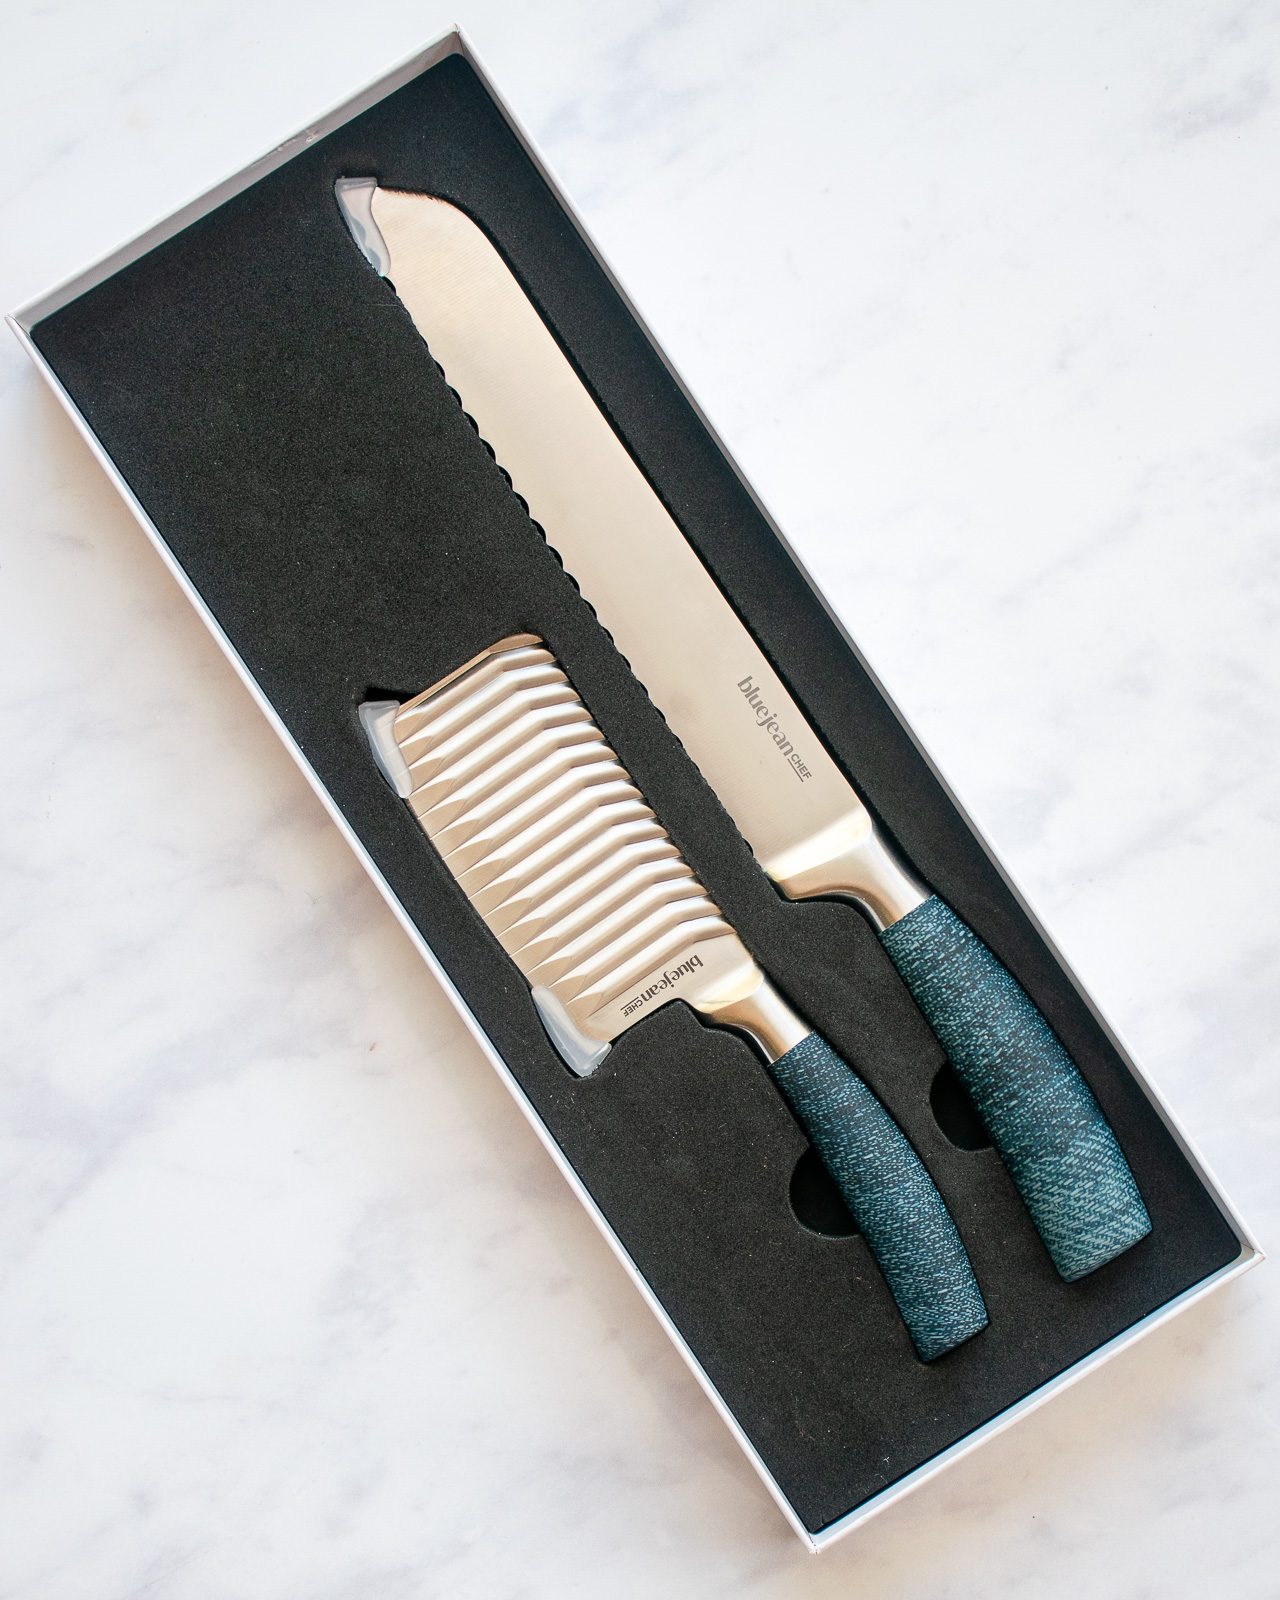 Chef Maeve 7 Piece Knife Set in Blue